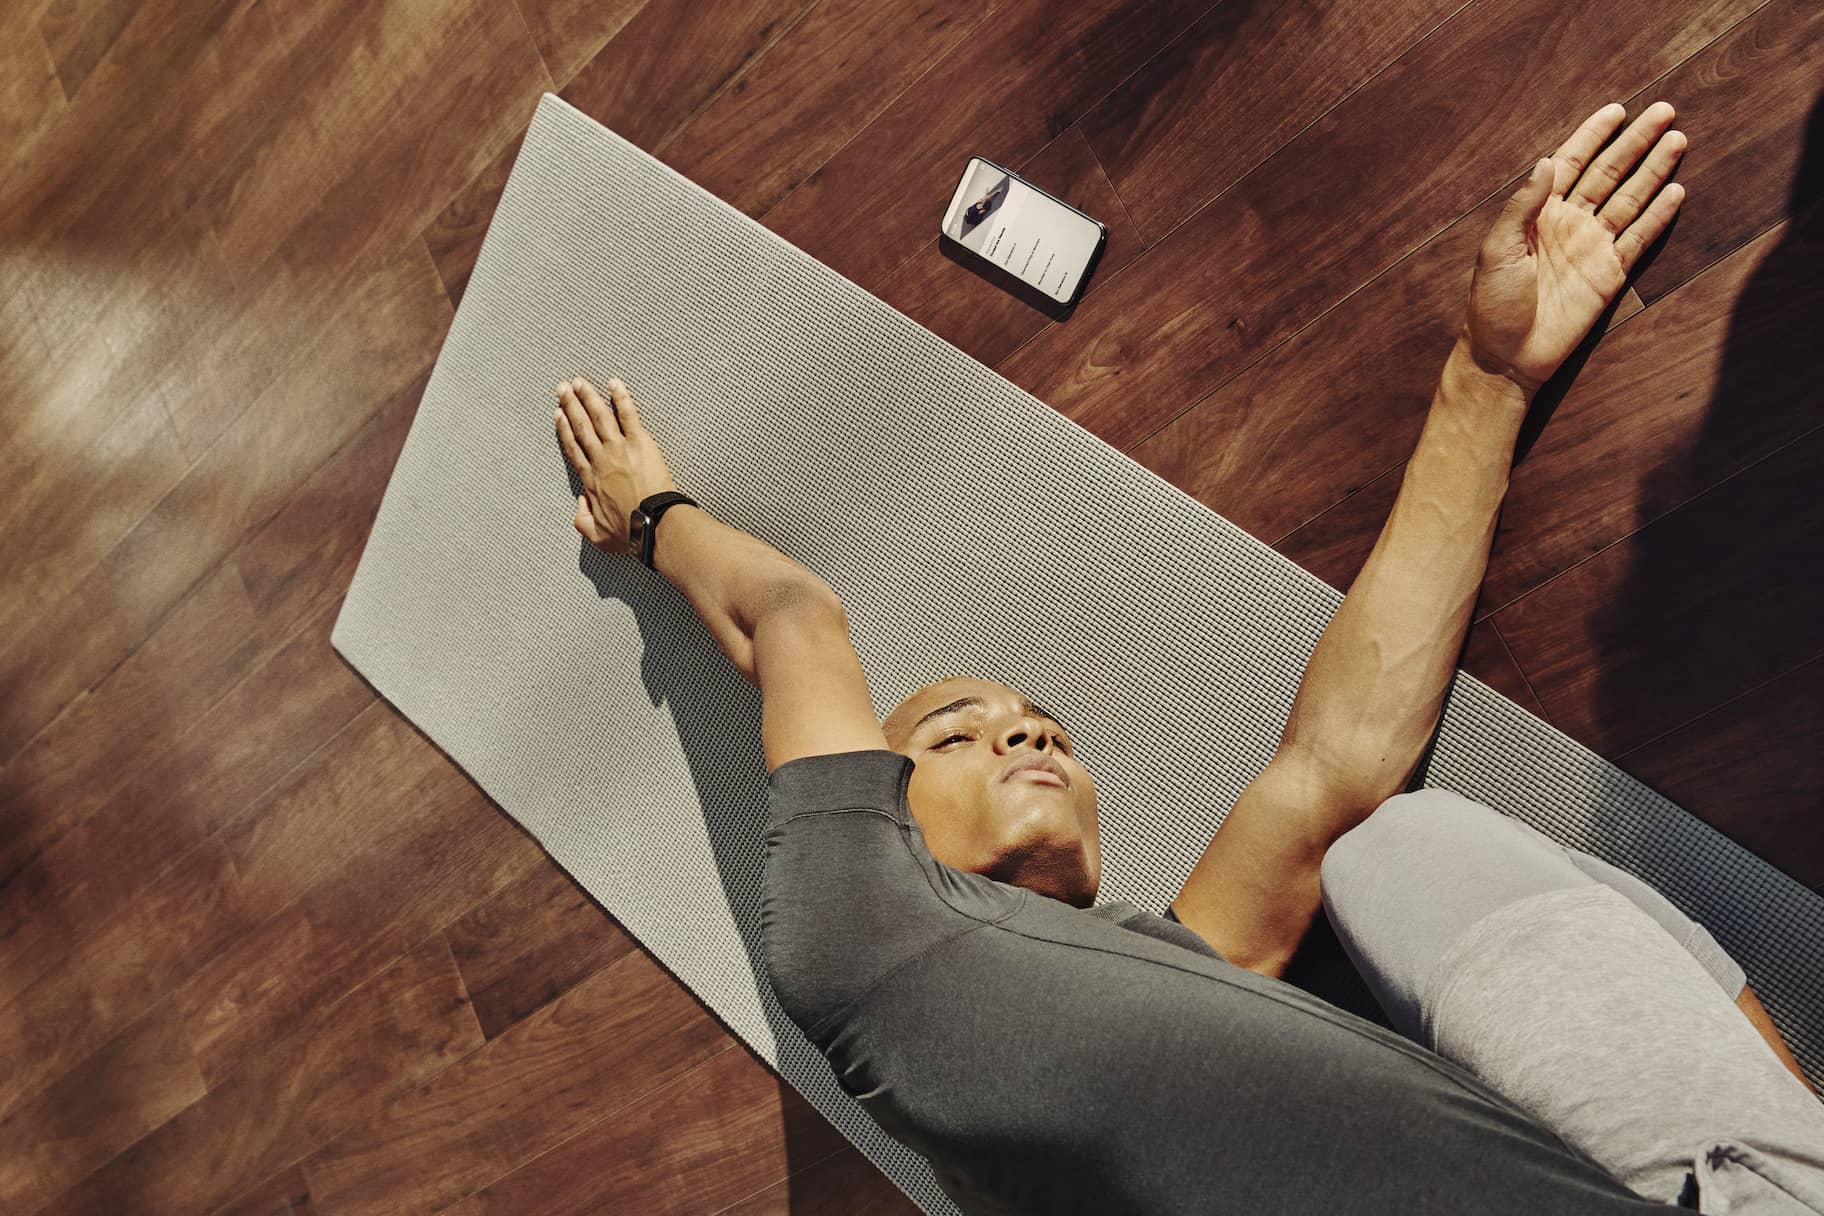 Discreet Persoon belast met sportgame telescoop No Gym, No Problem: The 10 Best At-Home Workouts to Try Now. Nike.com